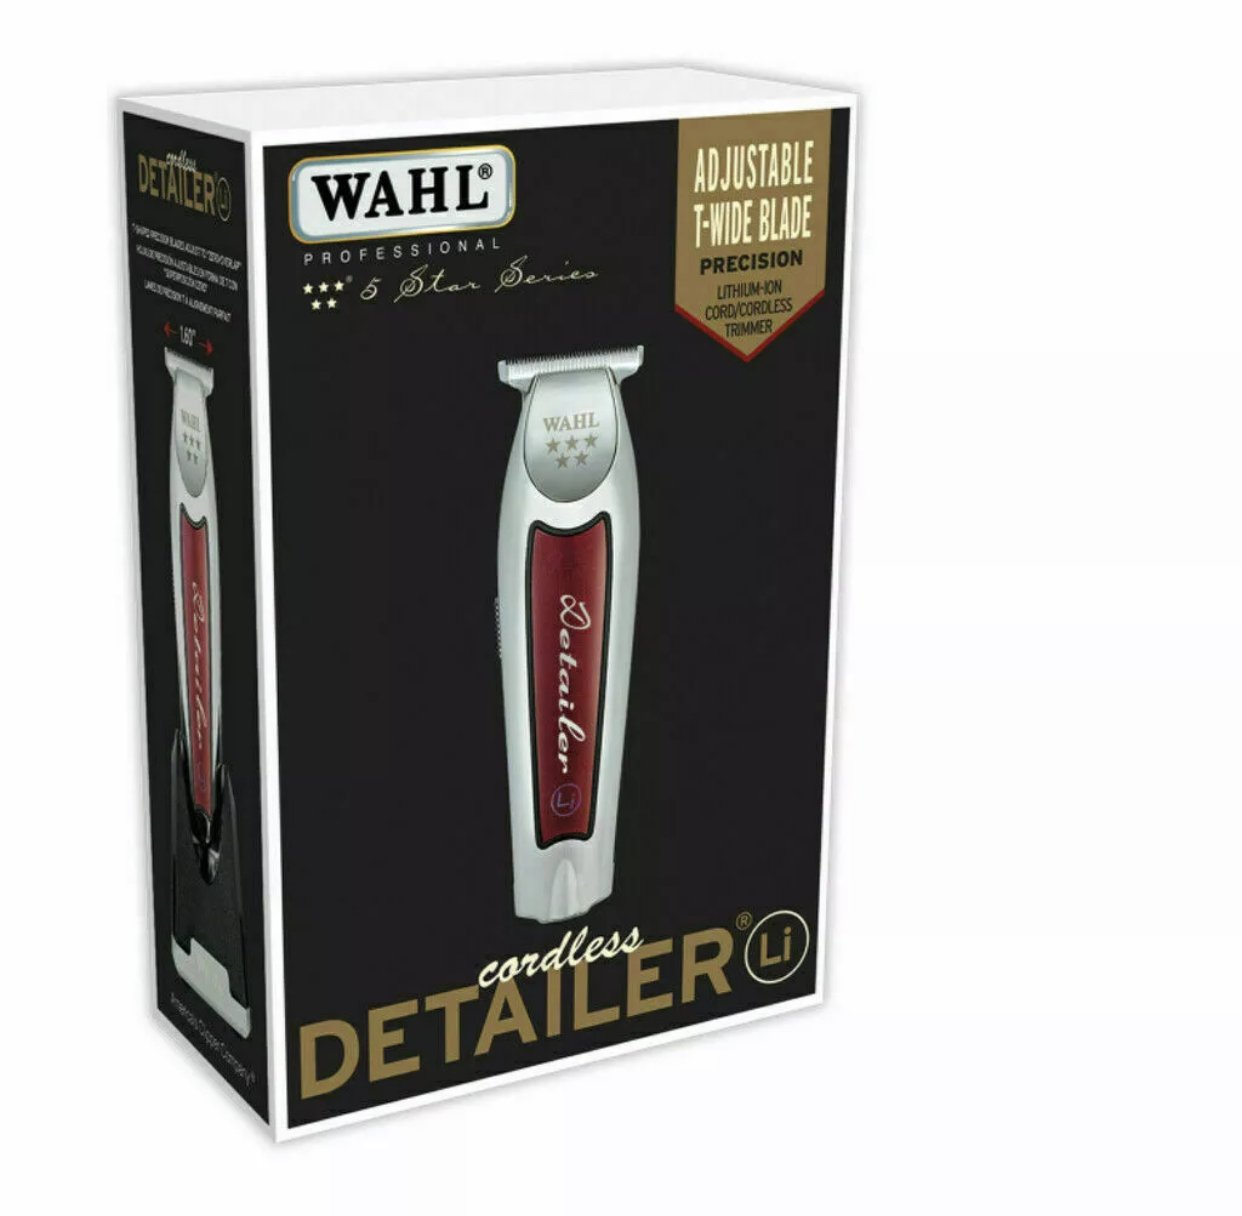 wahl 5 star cordless trimmer